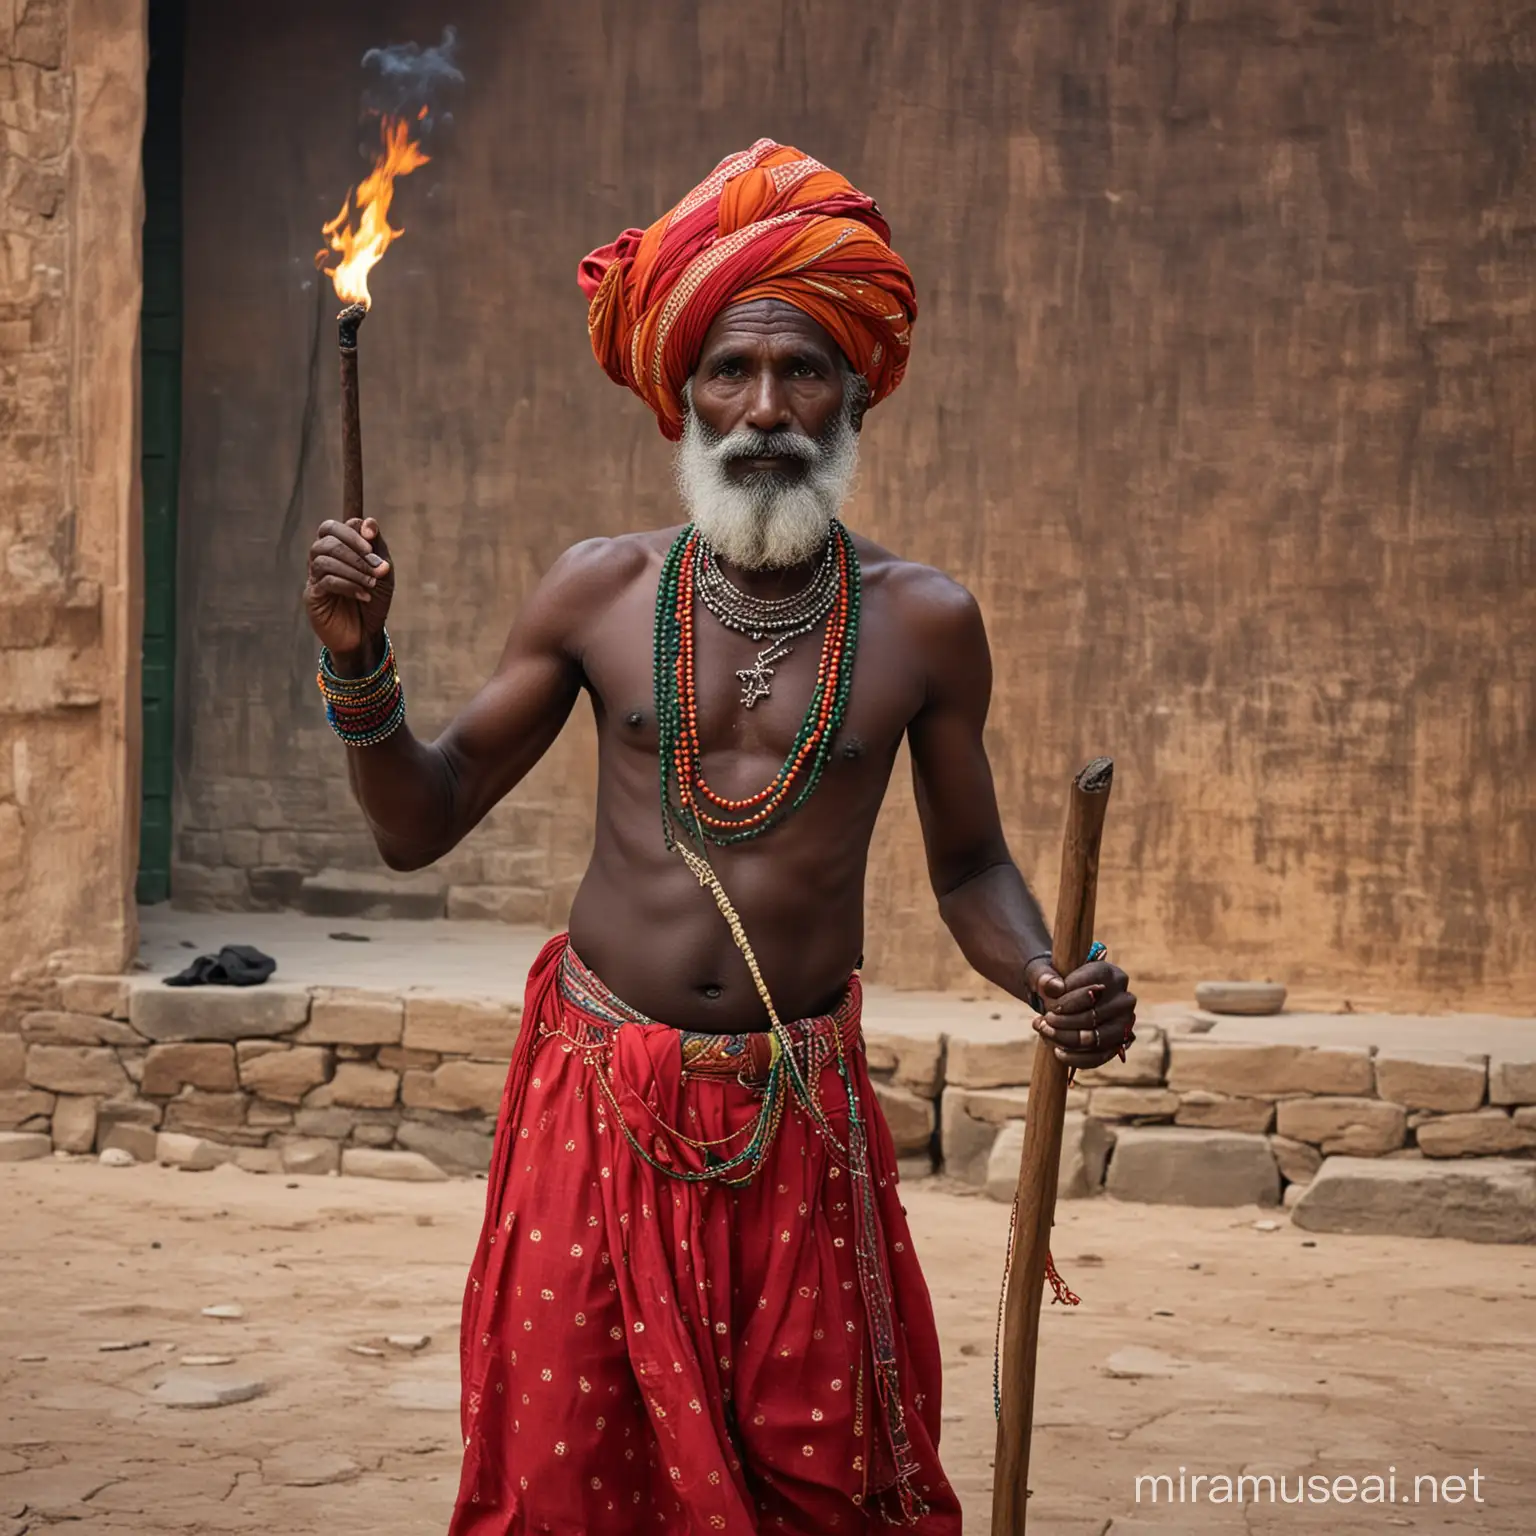 Elderly Fire Breather Performing Colorful Ritual at Vibrant Indian Temple